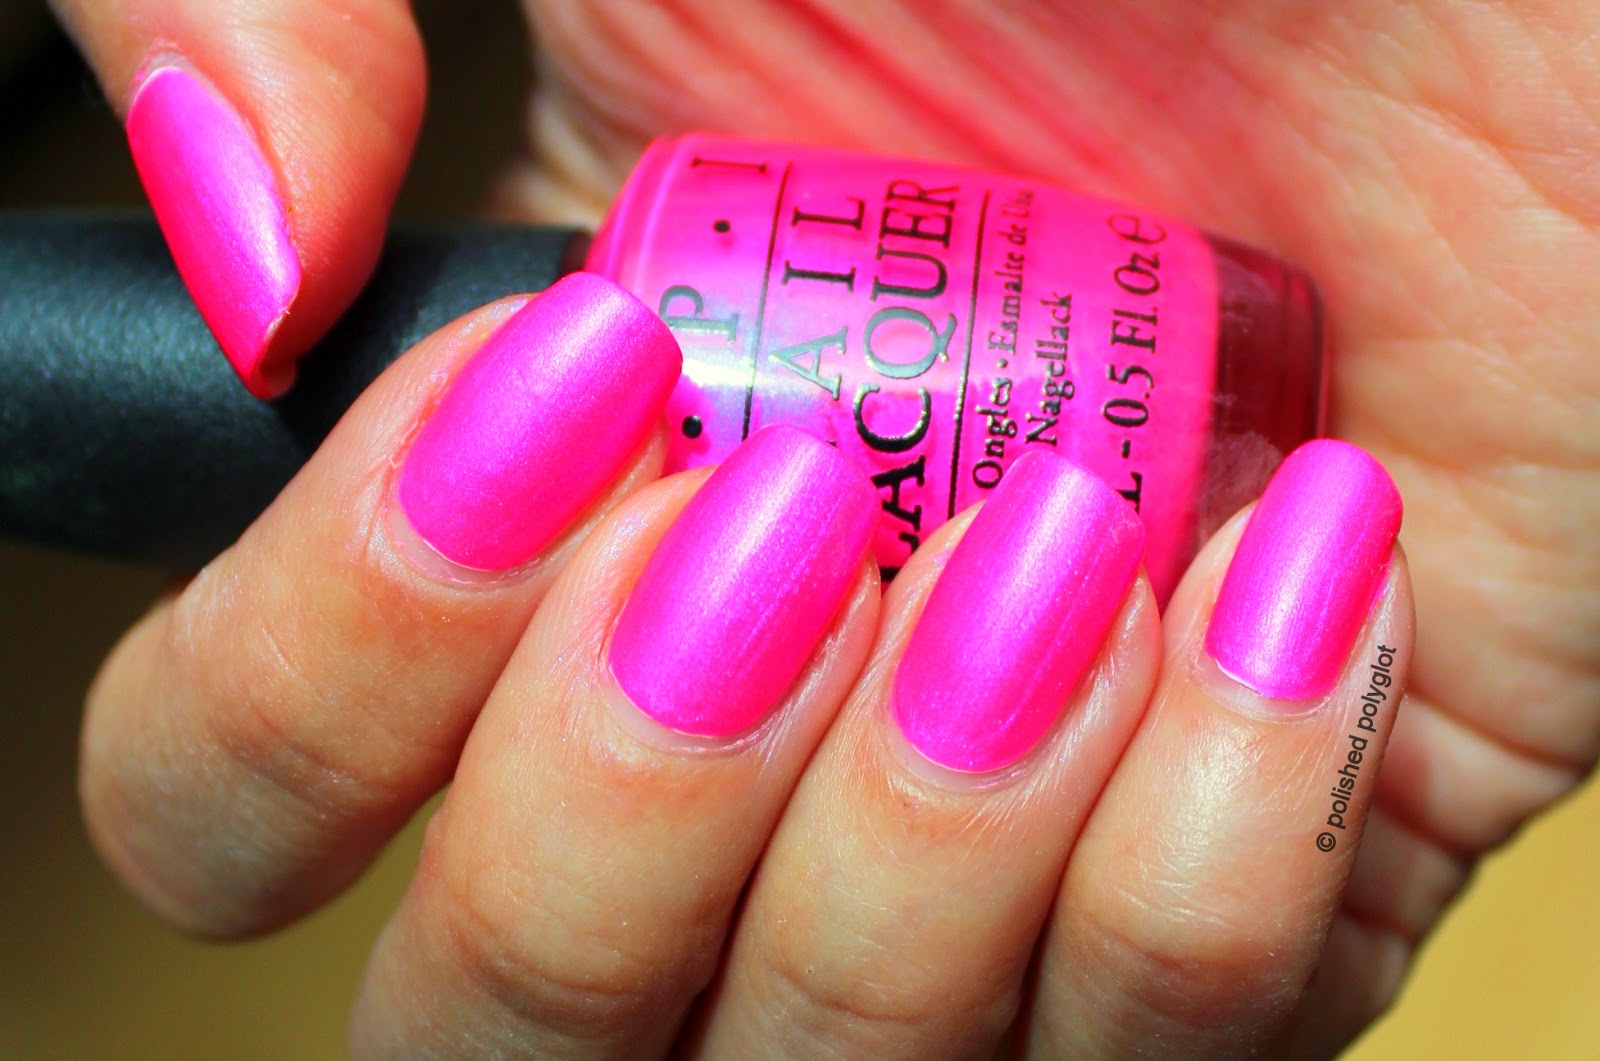 1. OPI Nail Lacquer in "Hotter Than You Pink" - wide 6